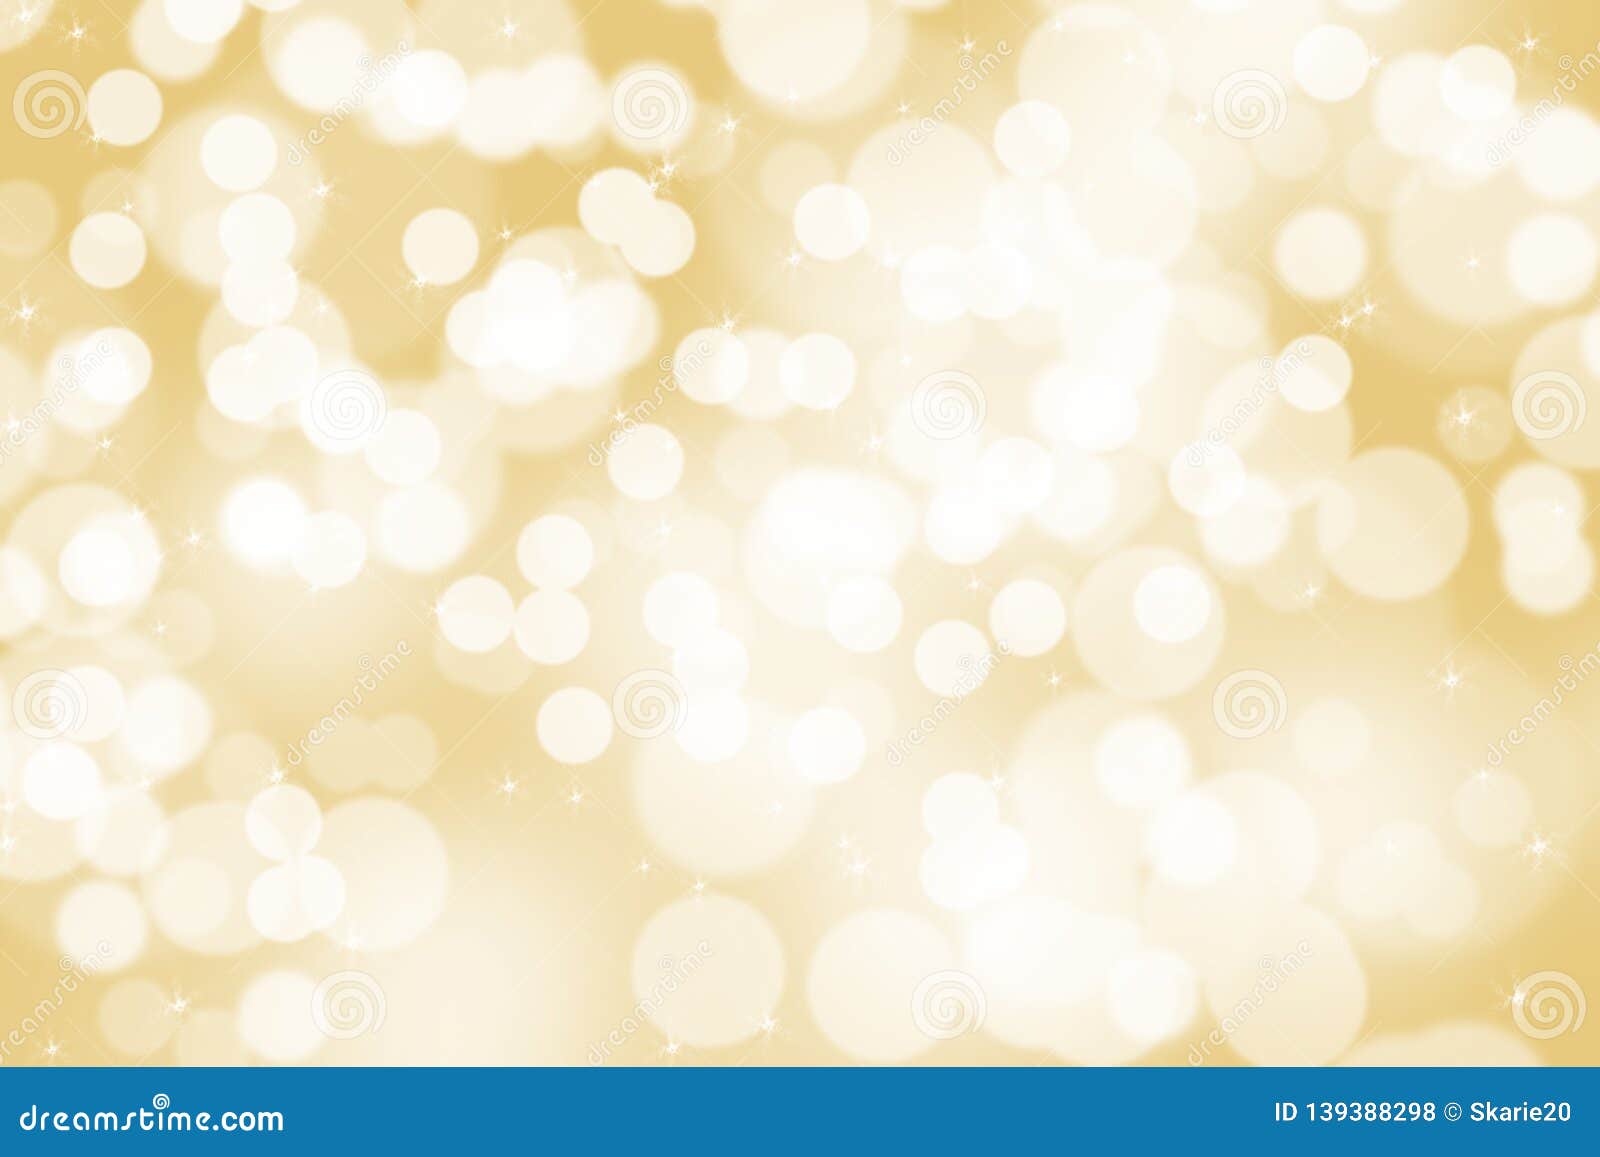 Golden background abstract light gold metal Vector Image